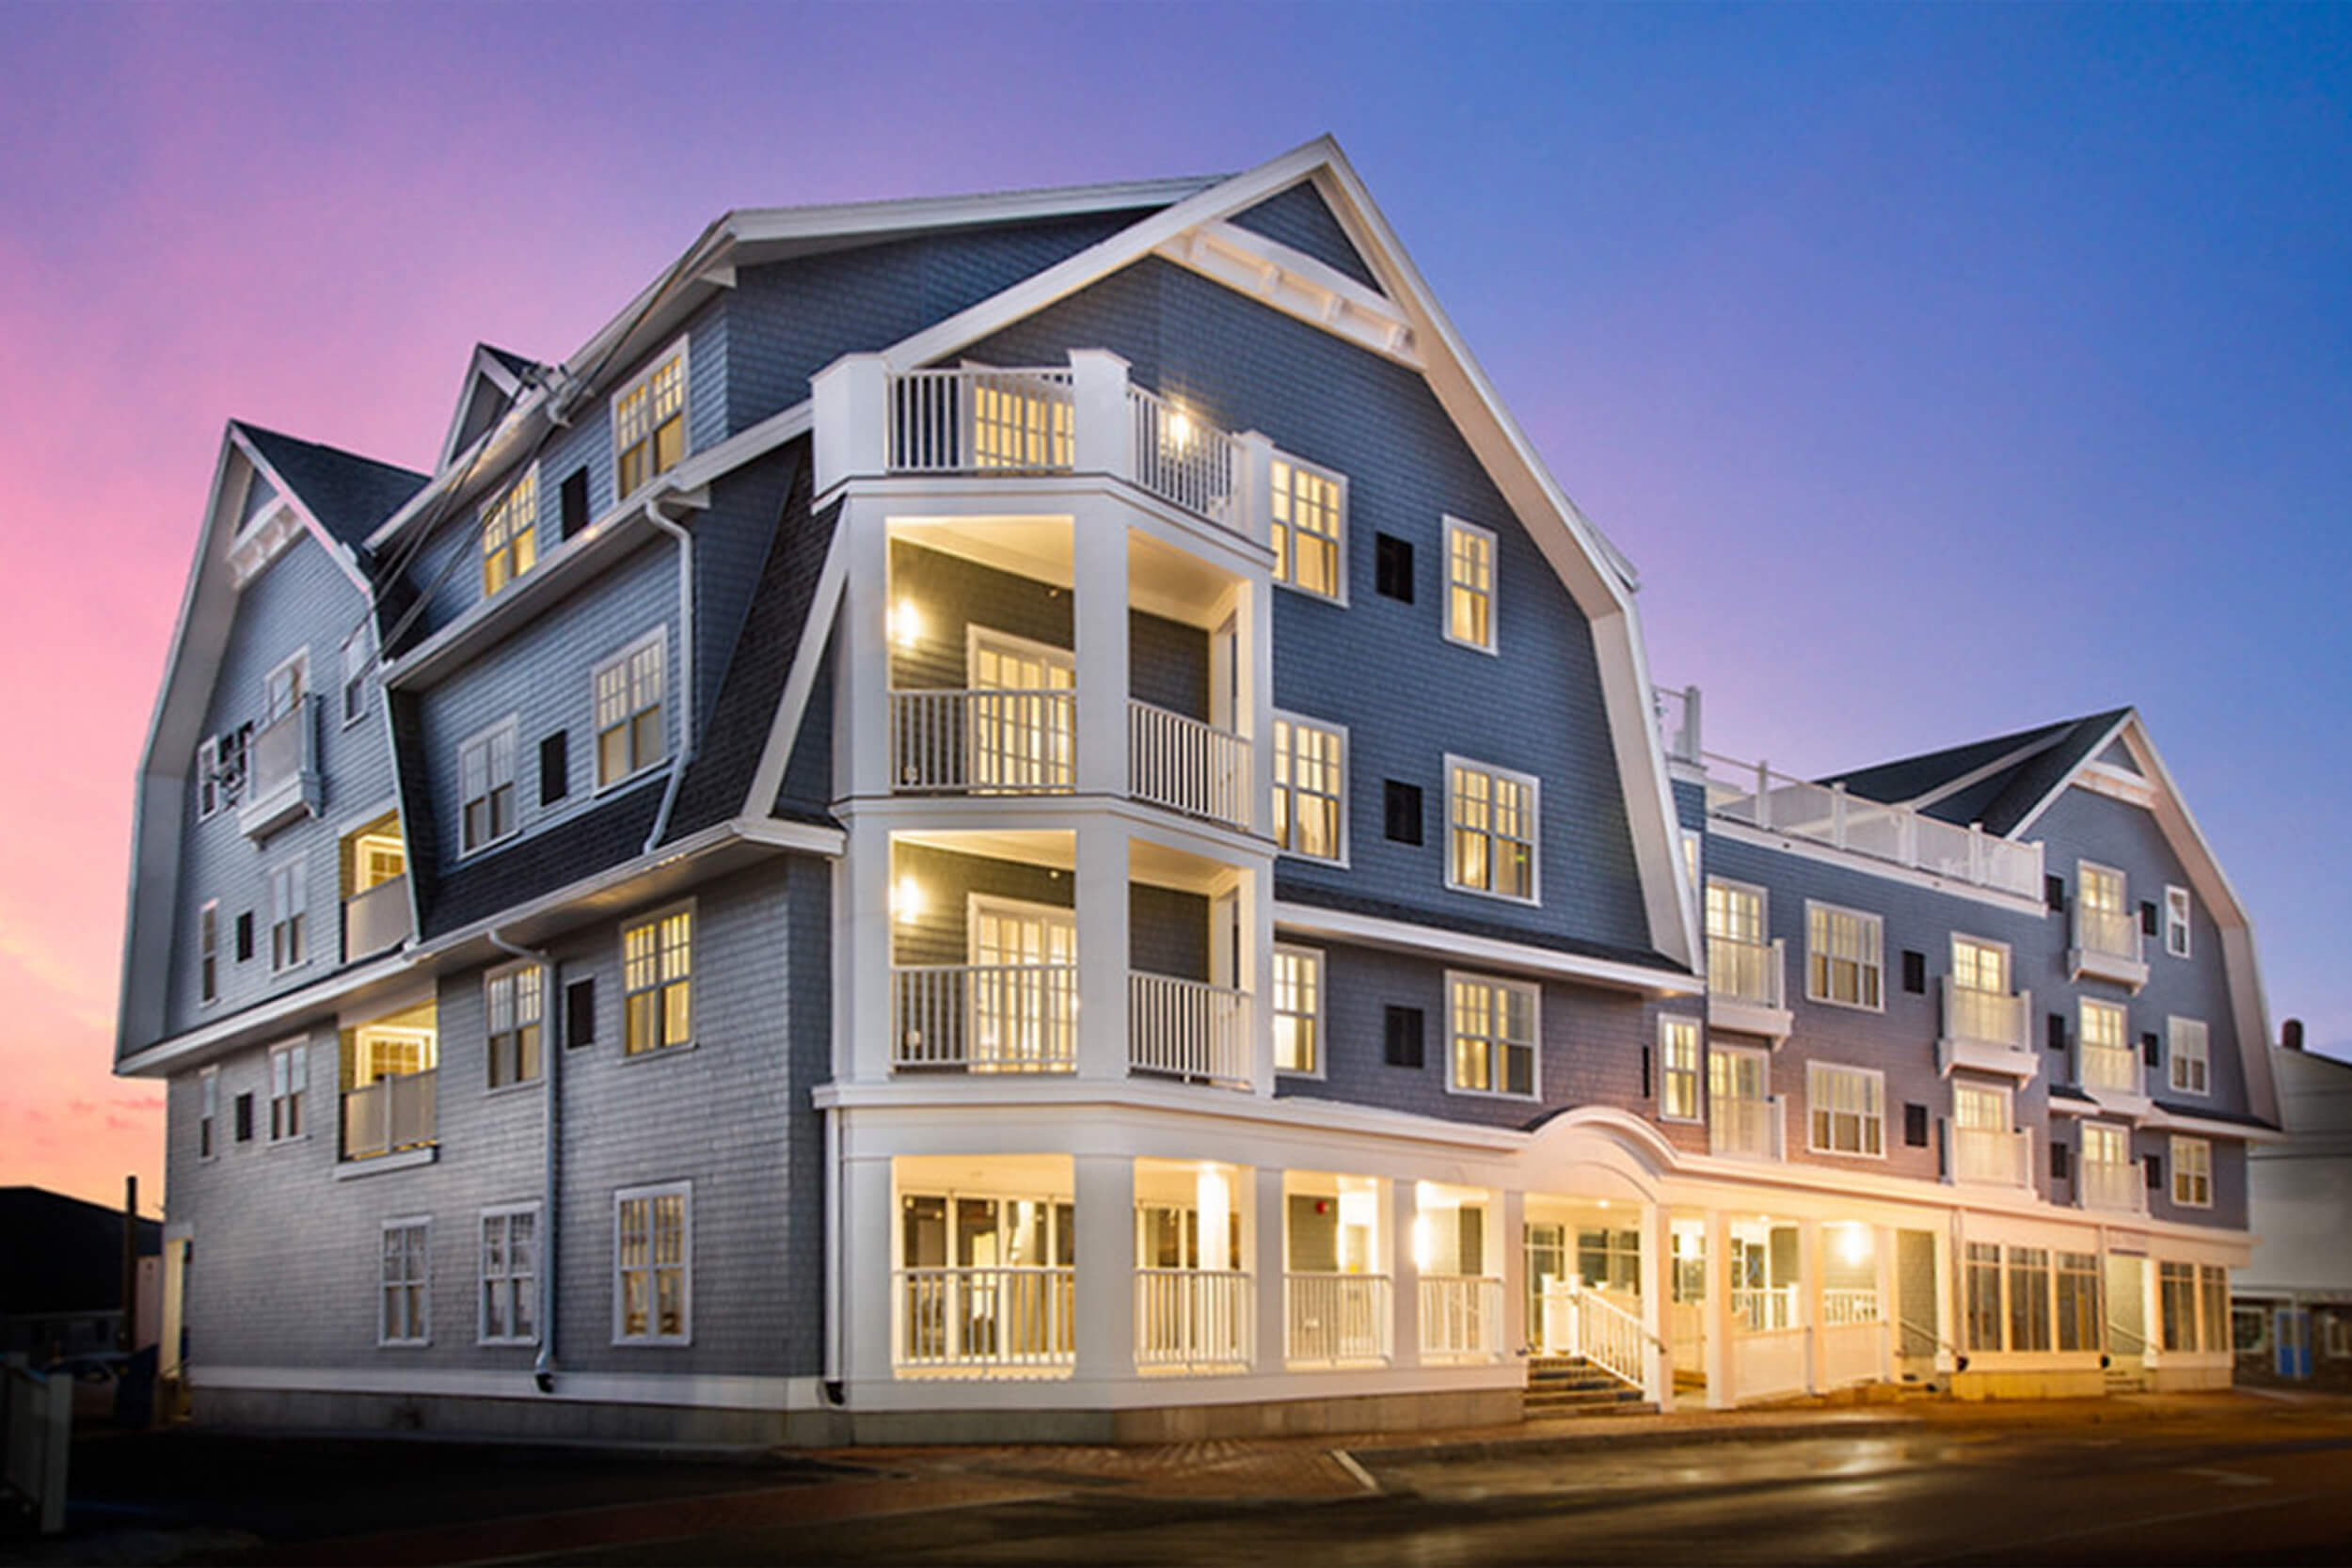 Exterior twilight photo of a beach club residence building. The four story building features blue siding with white trim, balconies, and an illuminated front porch area.